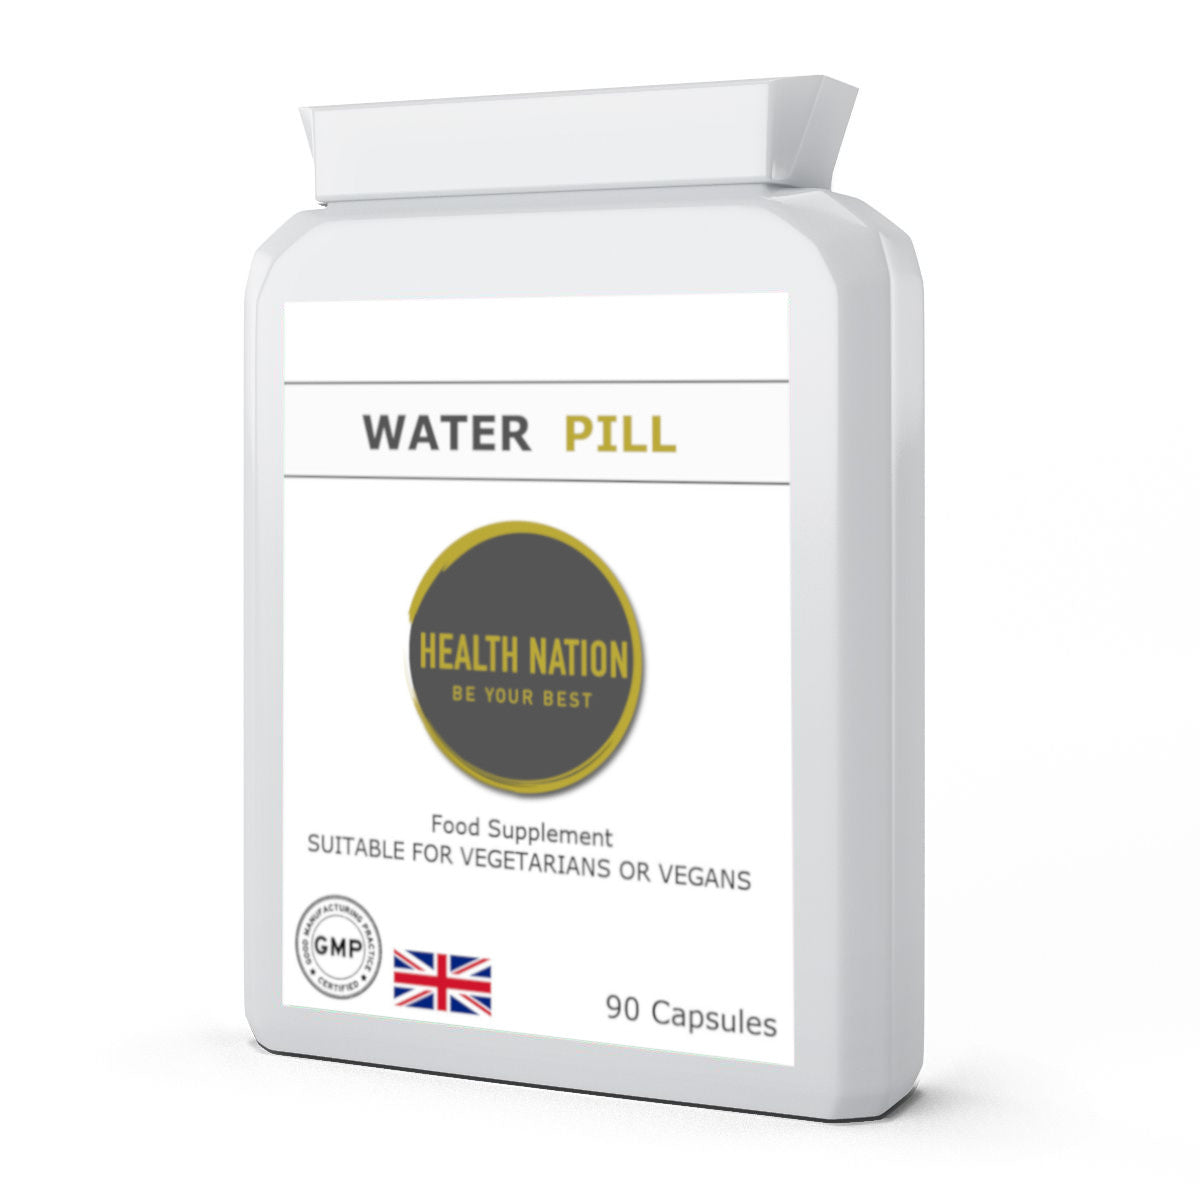 Water Pill (diuretic) | Helps with Excess Water, Bloating, Swelling and Detox | Made in UK | 90 Capsules - Health Nation